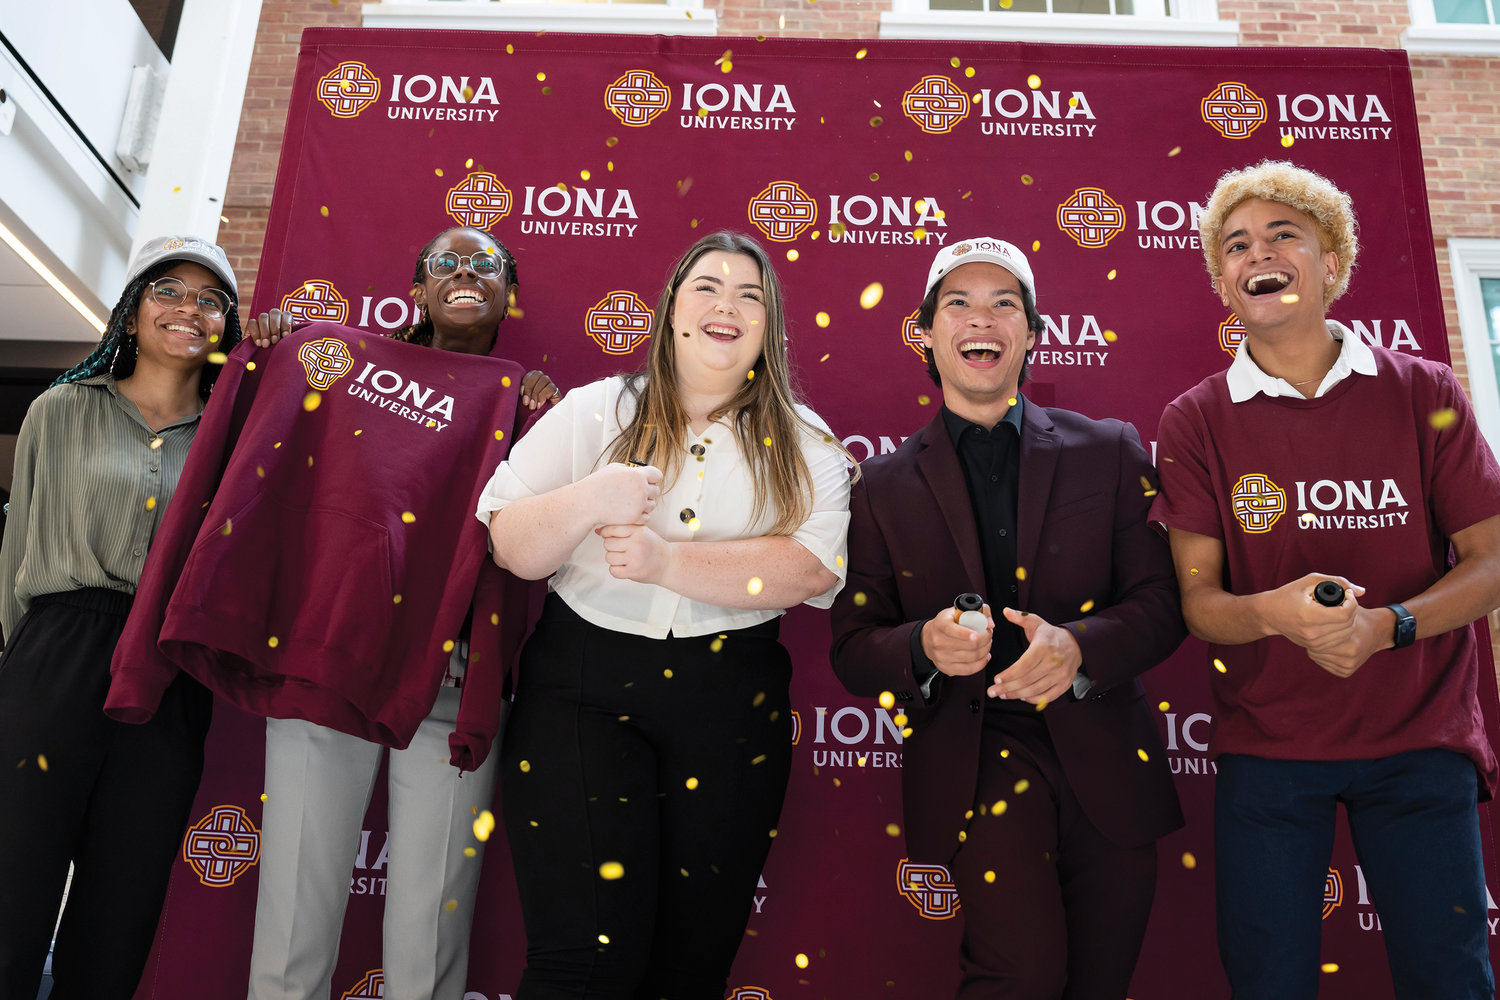 Iona University students in New Rochelle celebrate following the July 12 announcement that the institution’s name was changed from college to university. From left are Alesandra Payne ’24, Tonian Fullerton ’24, Maria Foley ’23, Brenden Martinez ’24 and Devon Gabriel ’23.